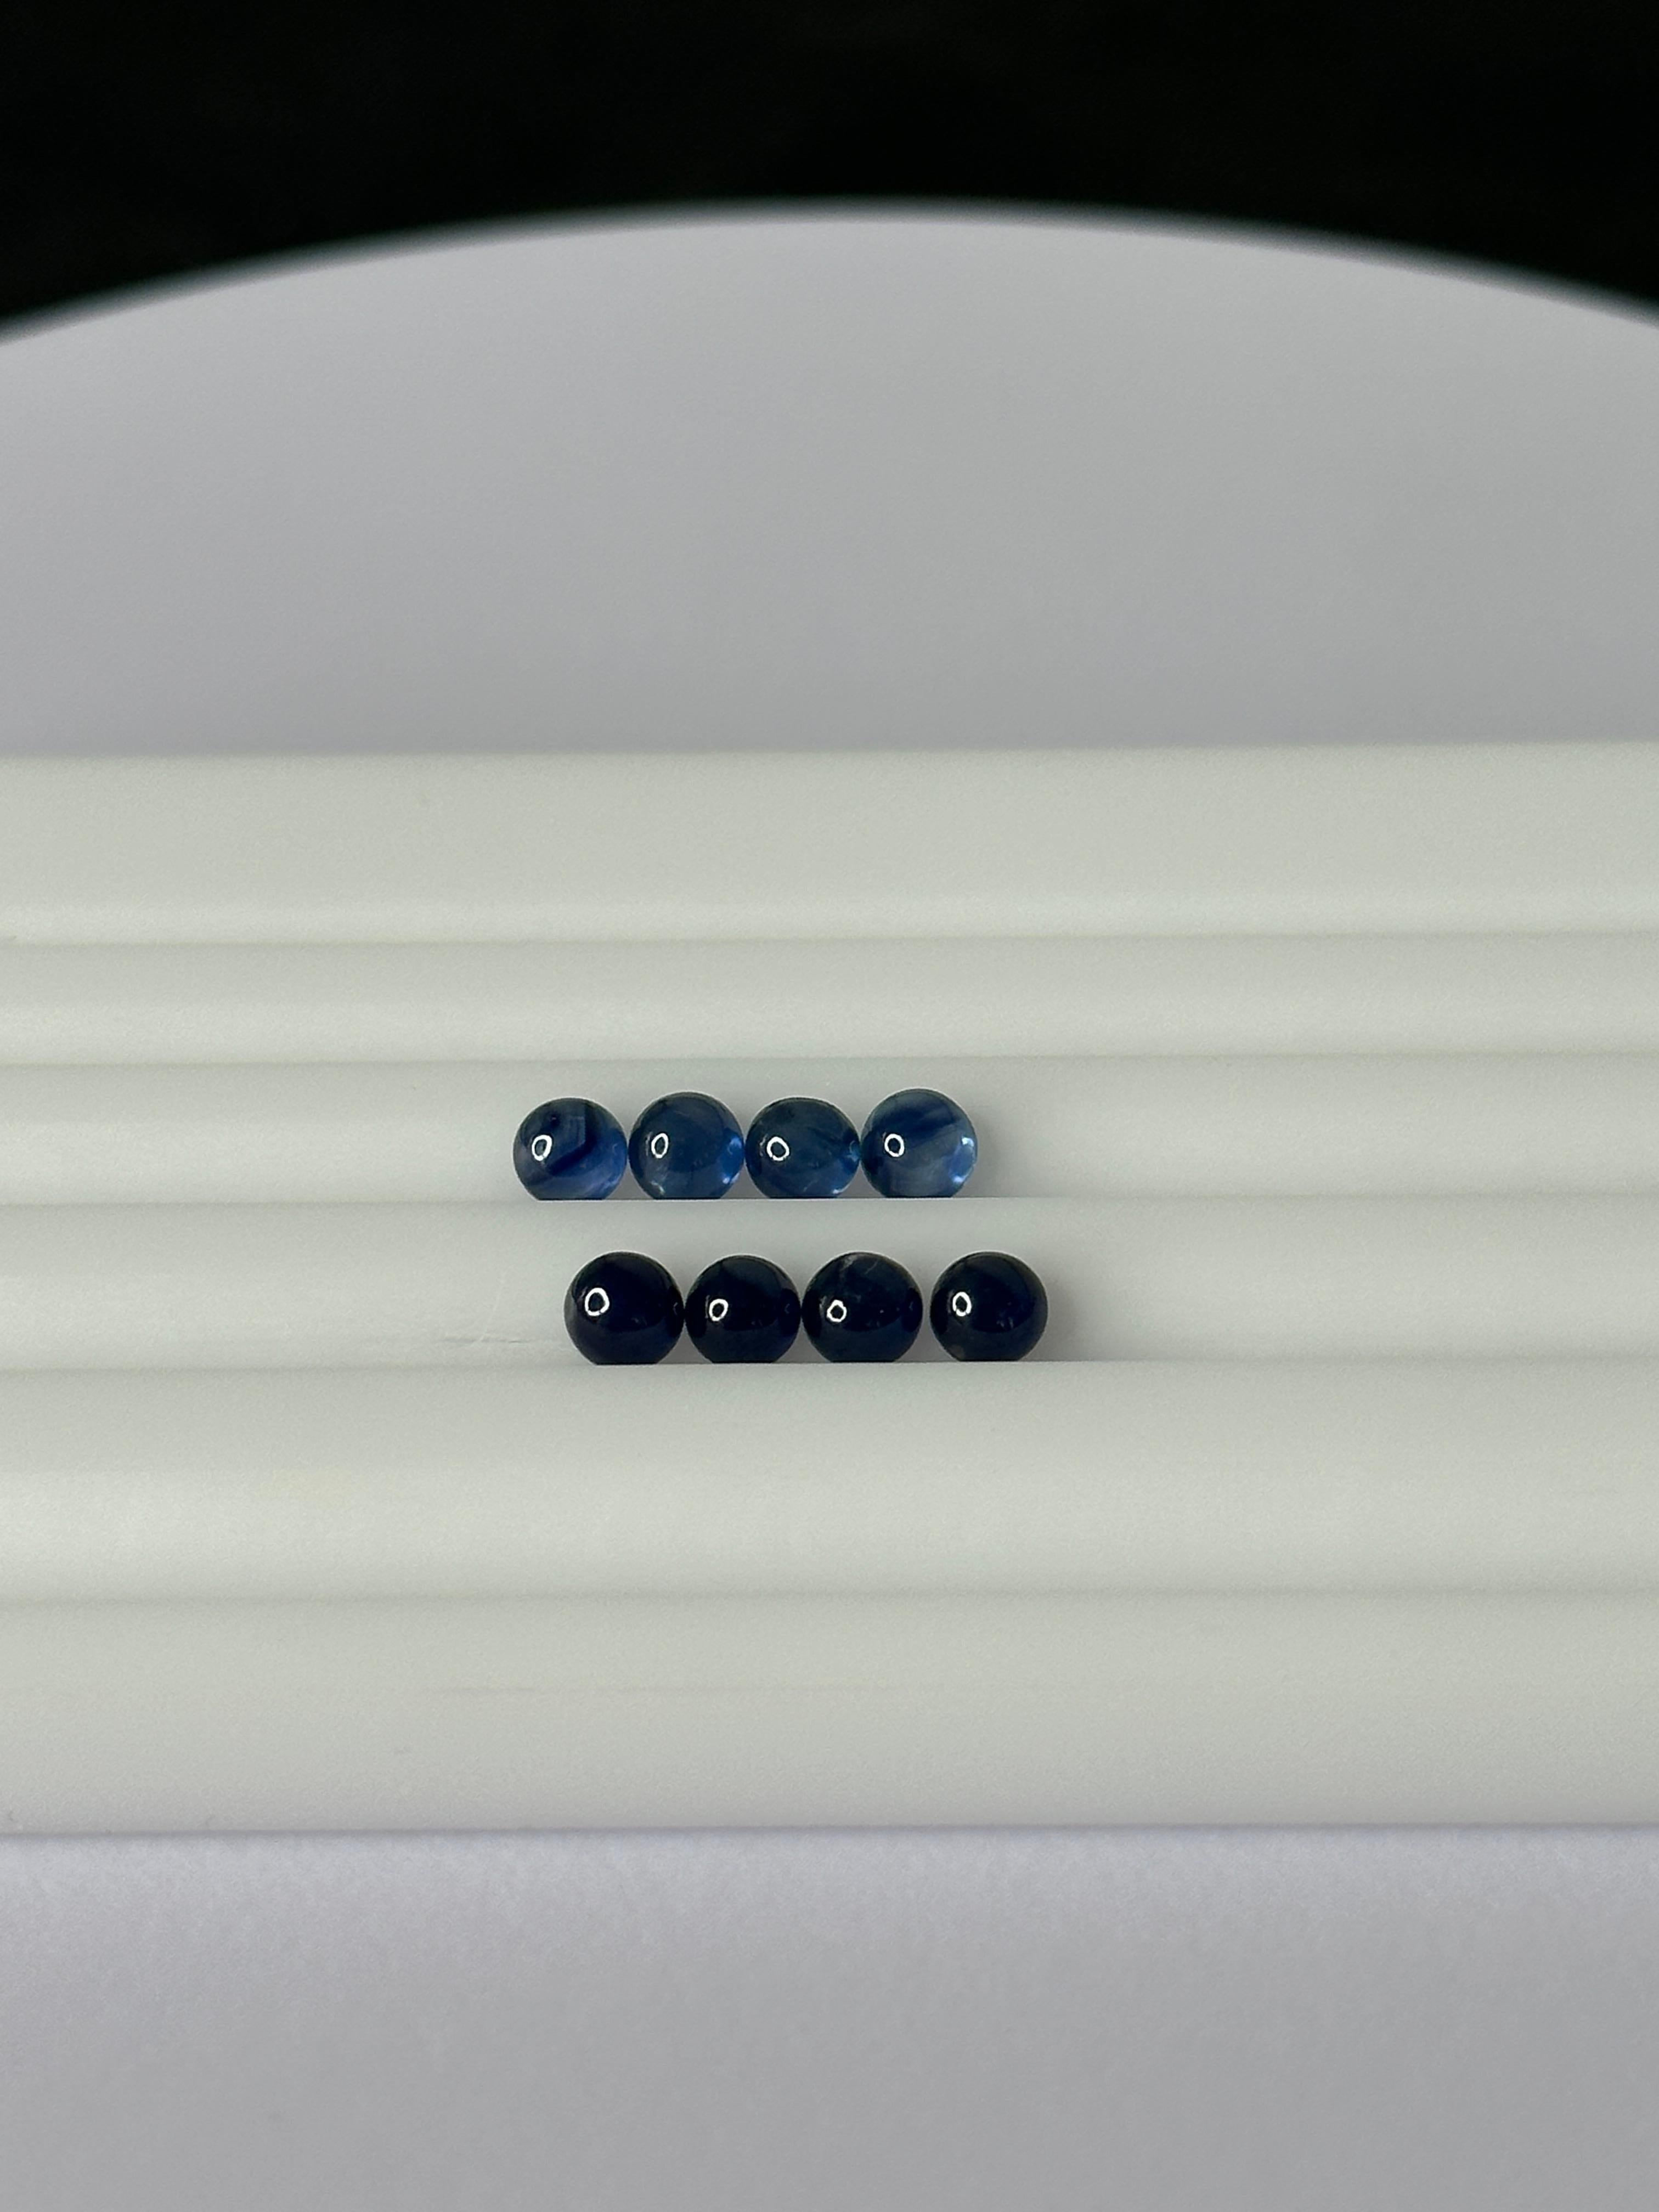 A lot of 8, 4mm blue sapphire cabochons amounting to a total of 3.13 carats in weight.

Weight: 3.13 carats
Shape: Round
Cut: Cabochon
Gem Dimensions: 3.85 - 4.00 x 2.35 - 2.65 mm
Color: Dark Blue

Mineral Type: Corundum
Gem Variety: Sapphire
